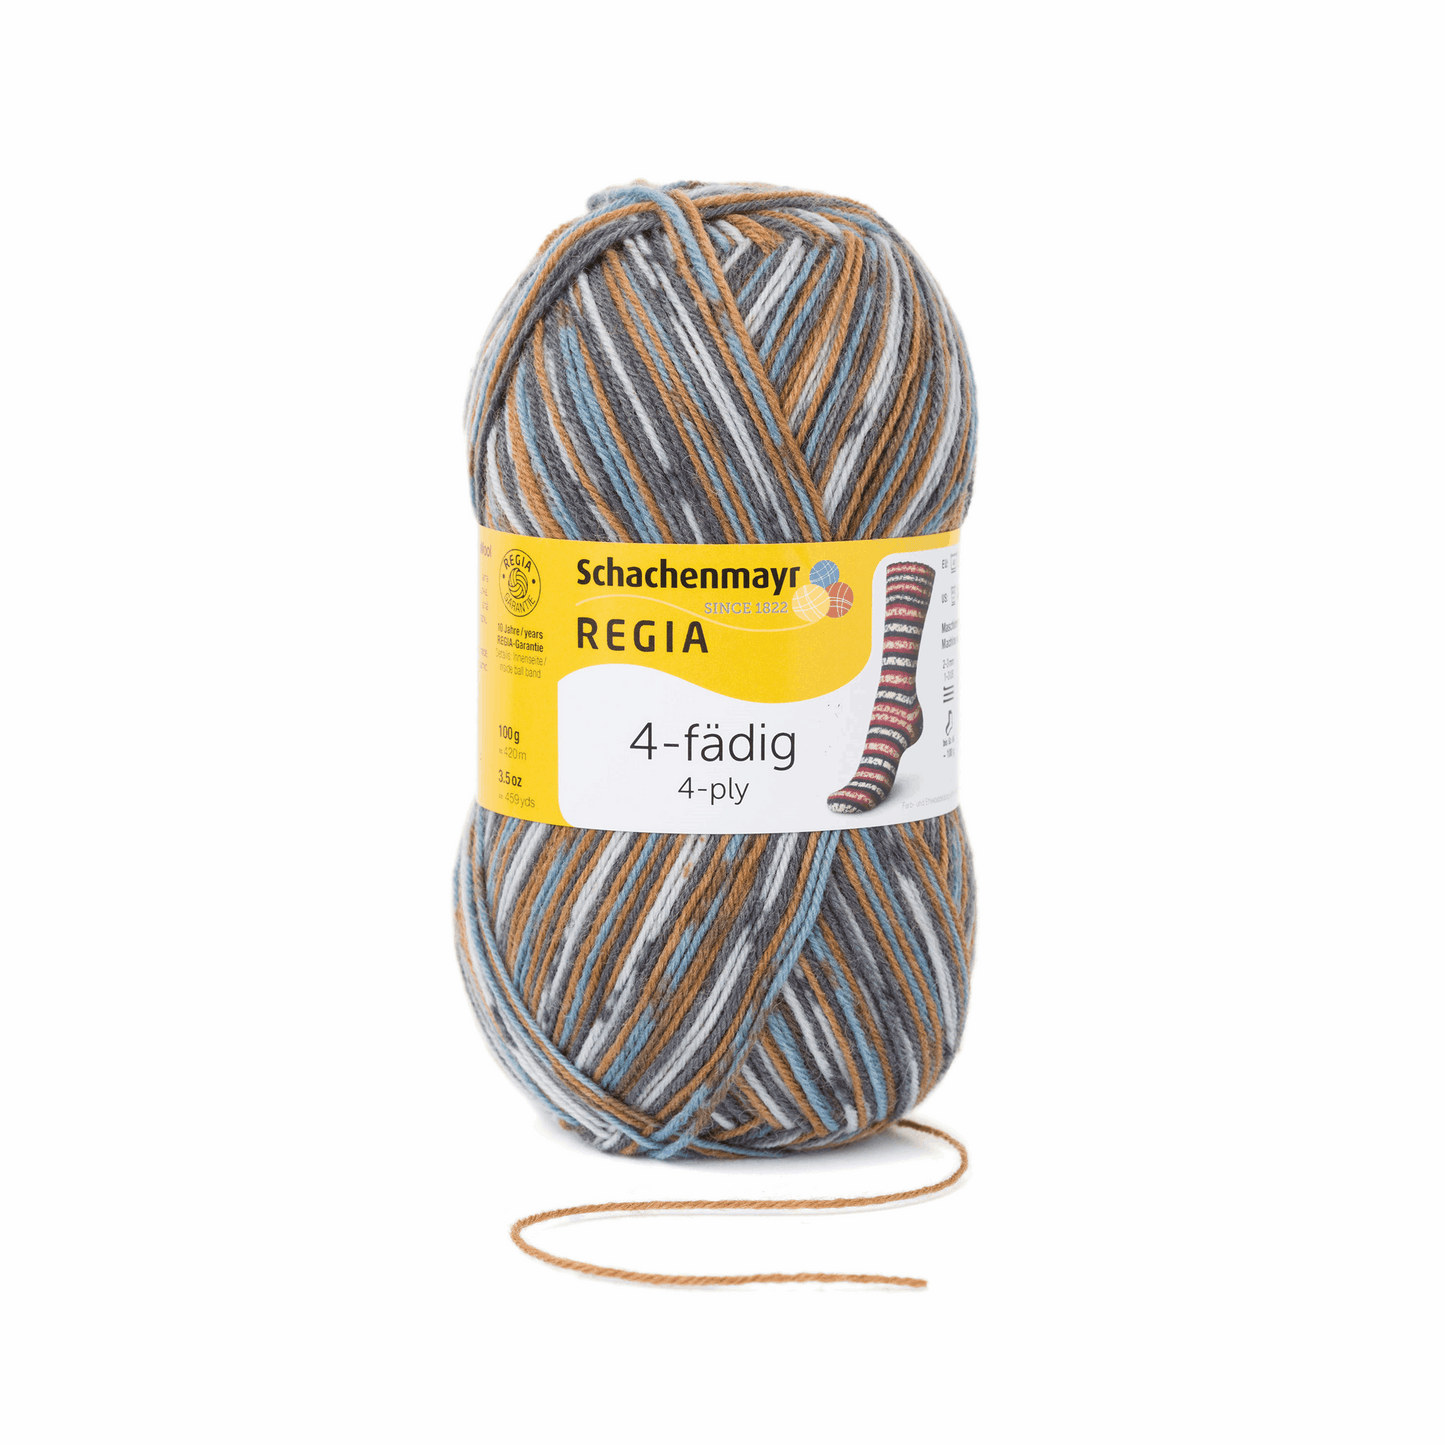 Regia 4-ply 100g, 90269, color 7710, icicles